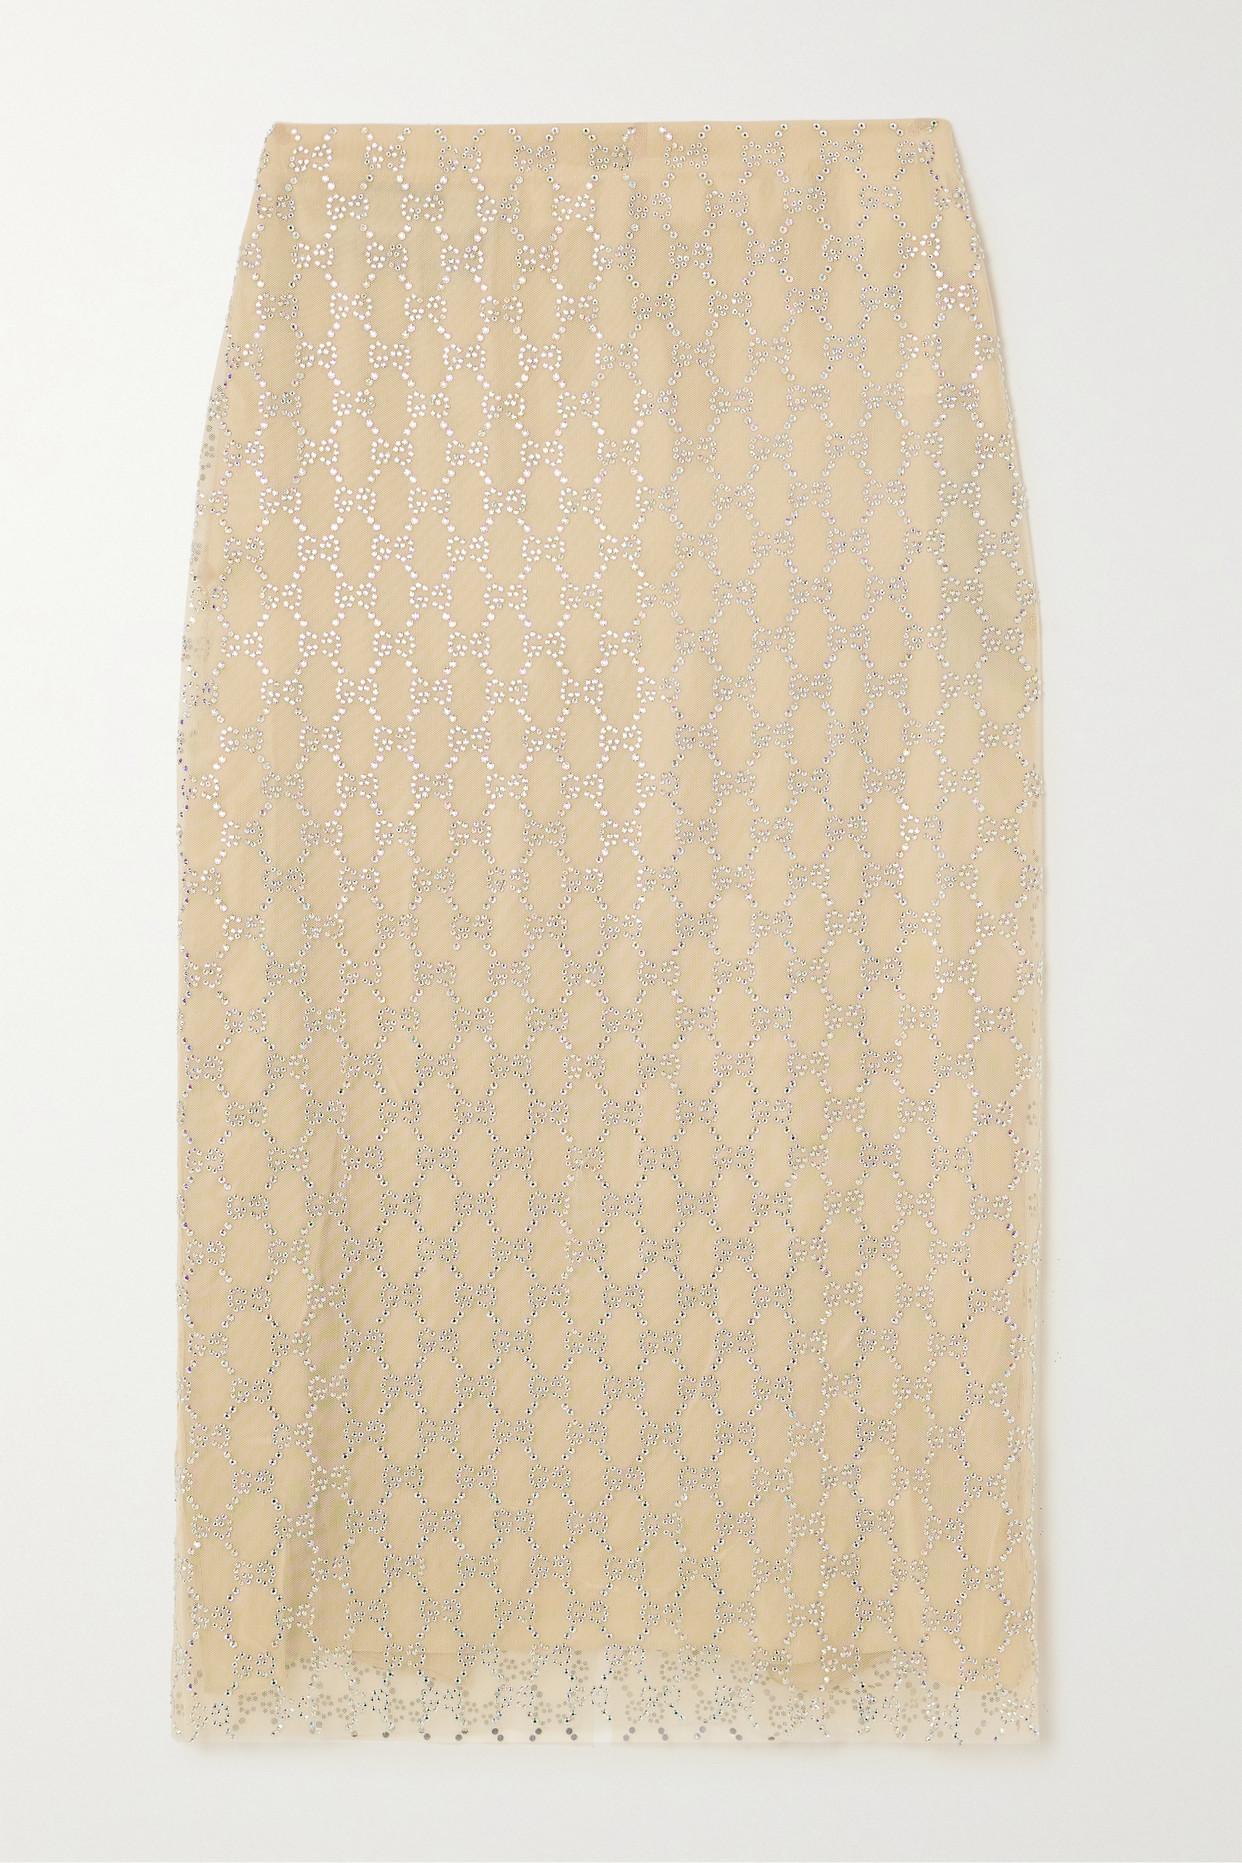 Gucci Crystal-embellished Stretch-tulle Midi Skirt in Natural | Lyst